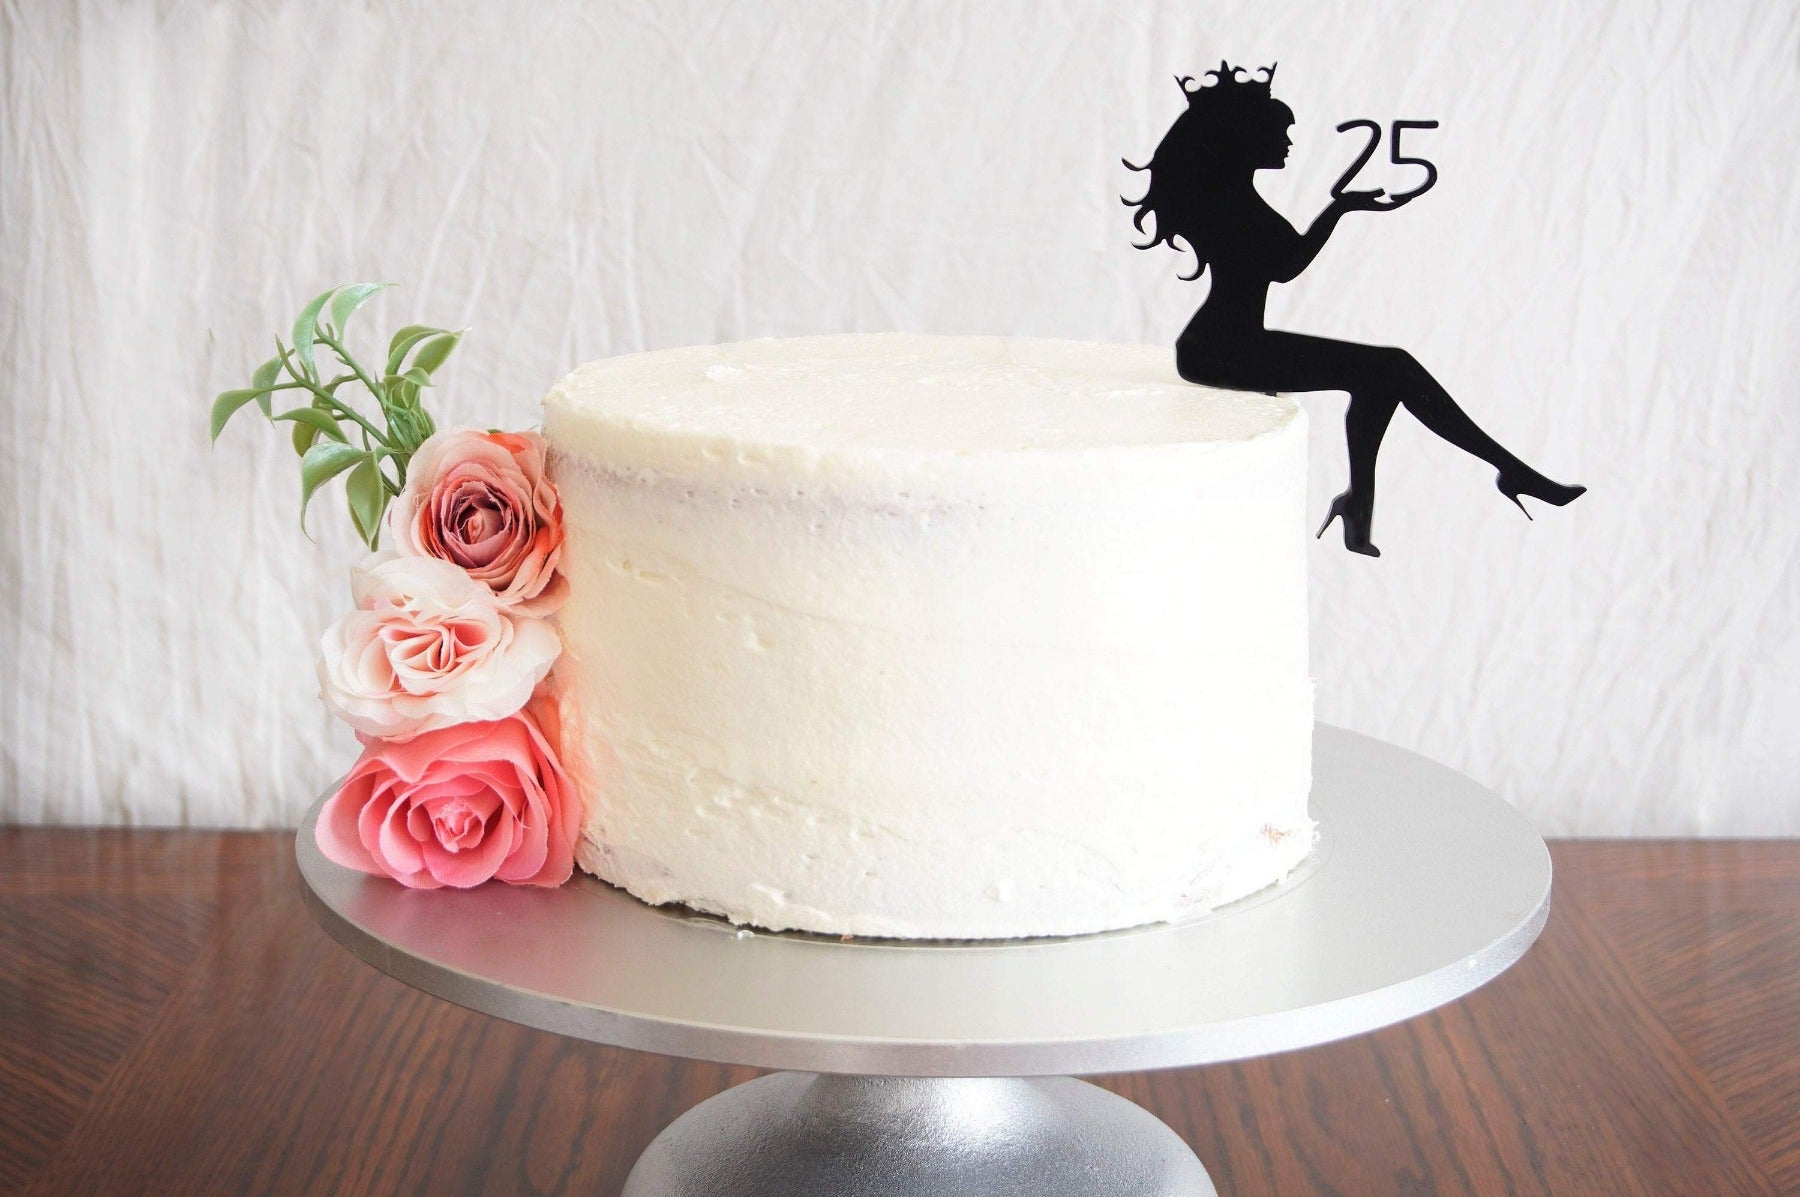 Diva Sitting Girl Silhouette Birthday Cake Topper | Personalized Any Age Birthday Cake Topper | Custom Cake Topper Made with Acrylic